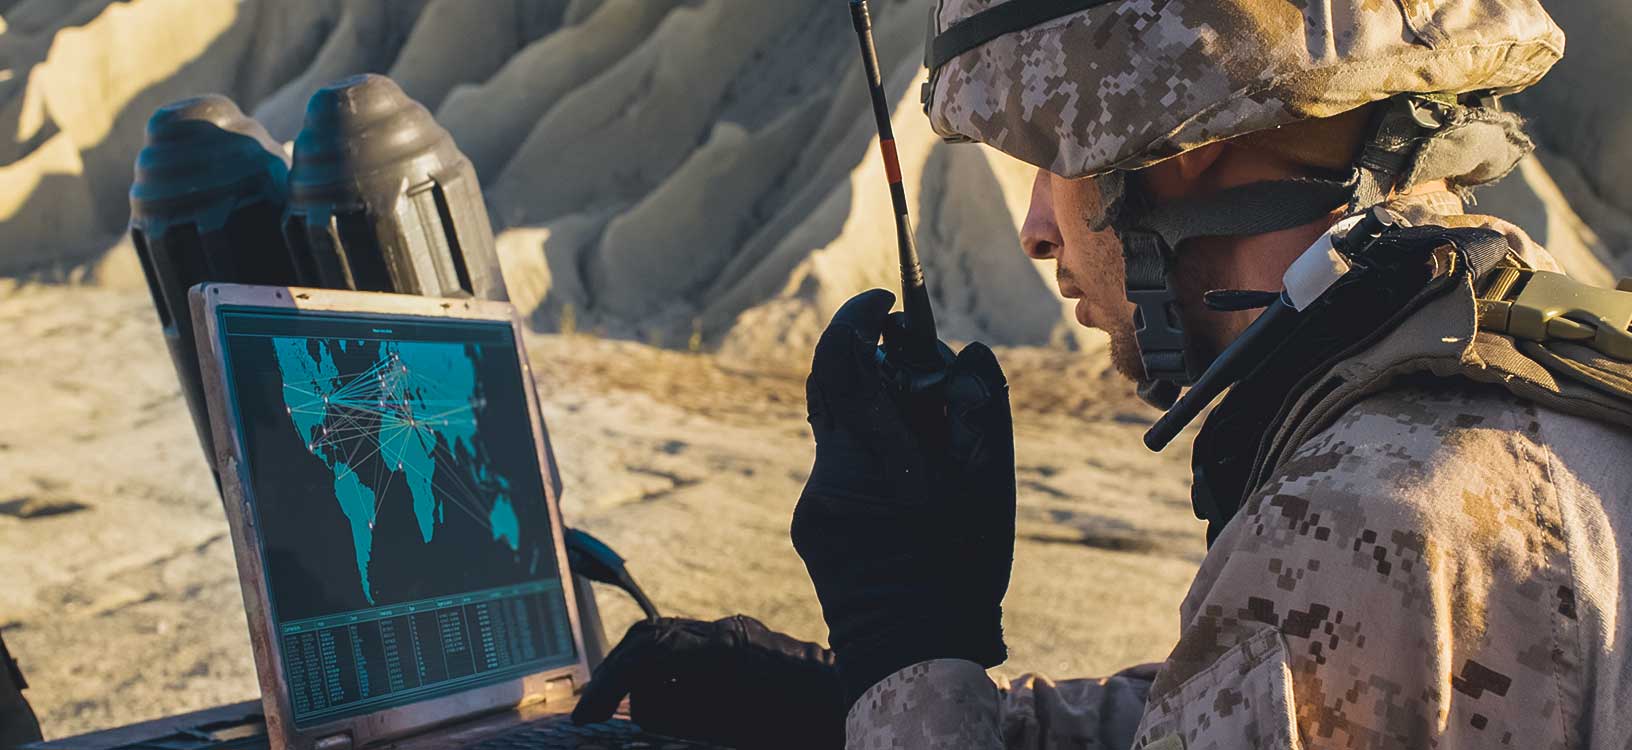 Soldier is Using Laptop Computer and Radio for Communication During Military Operation in the Desert